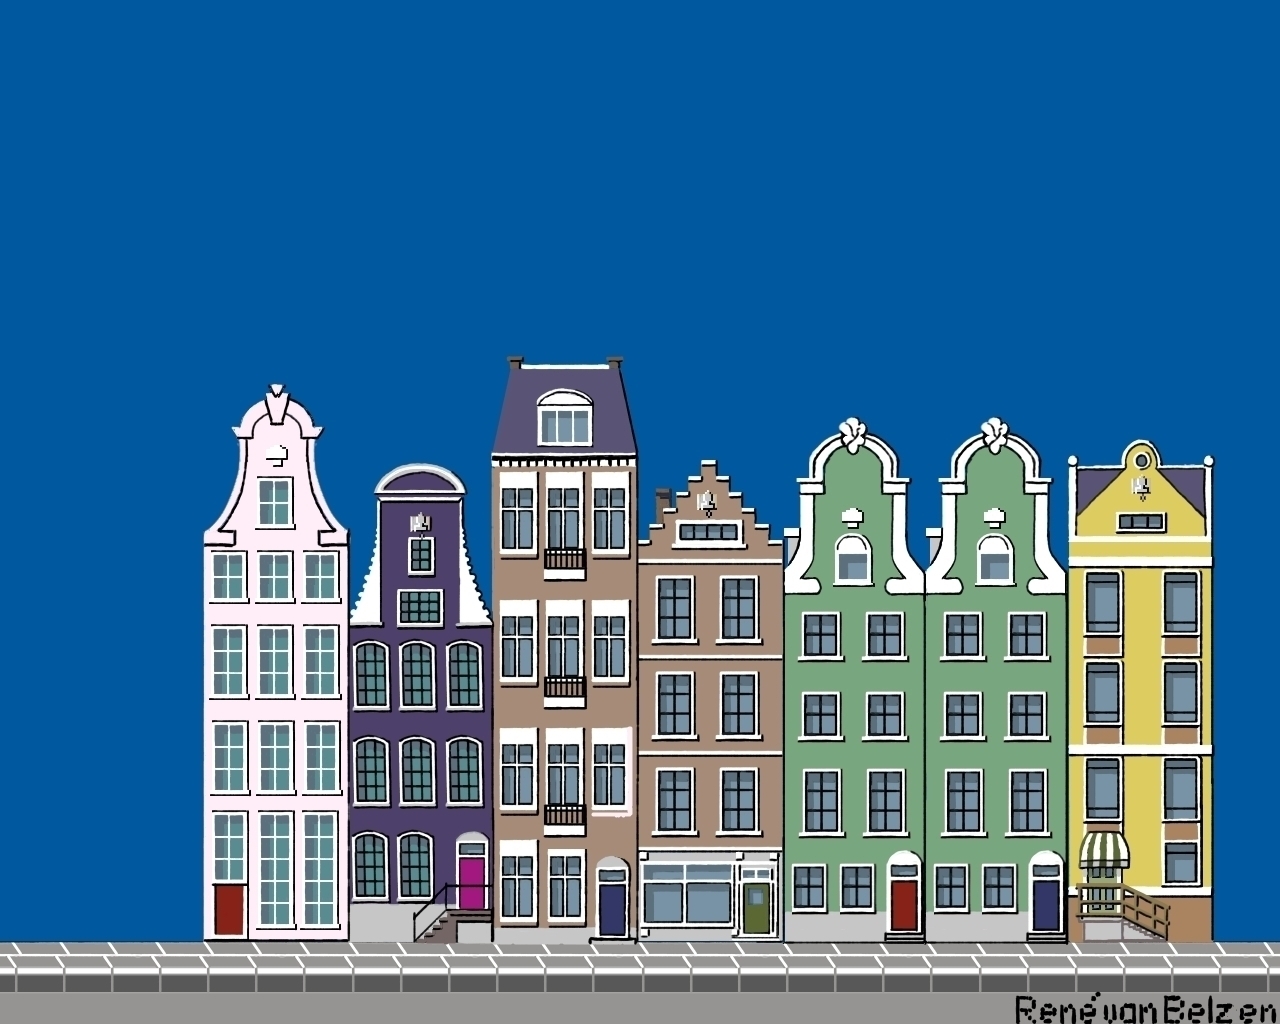 pixel art with merchant houses on a blue background